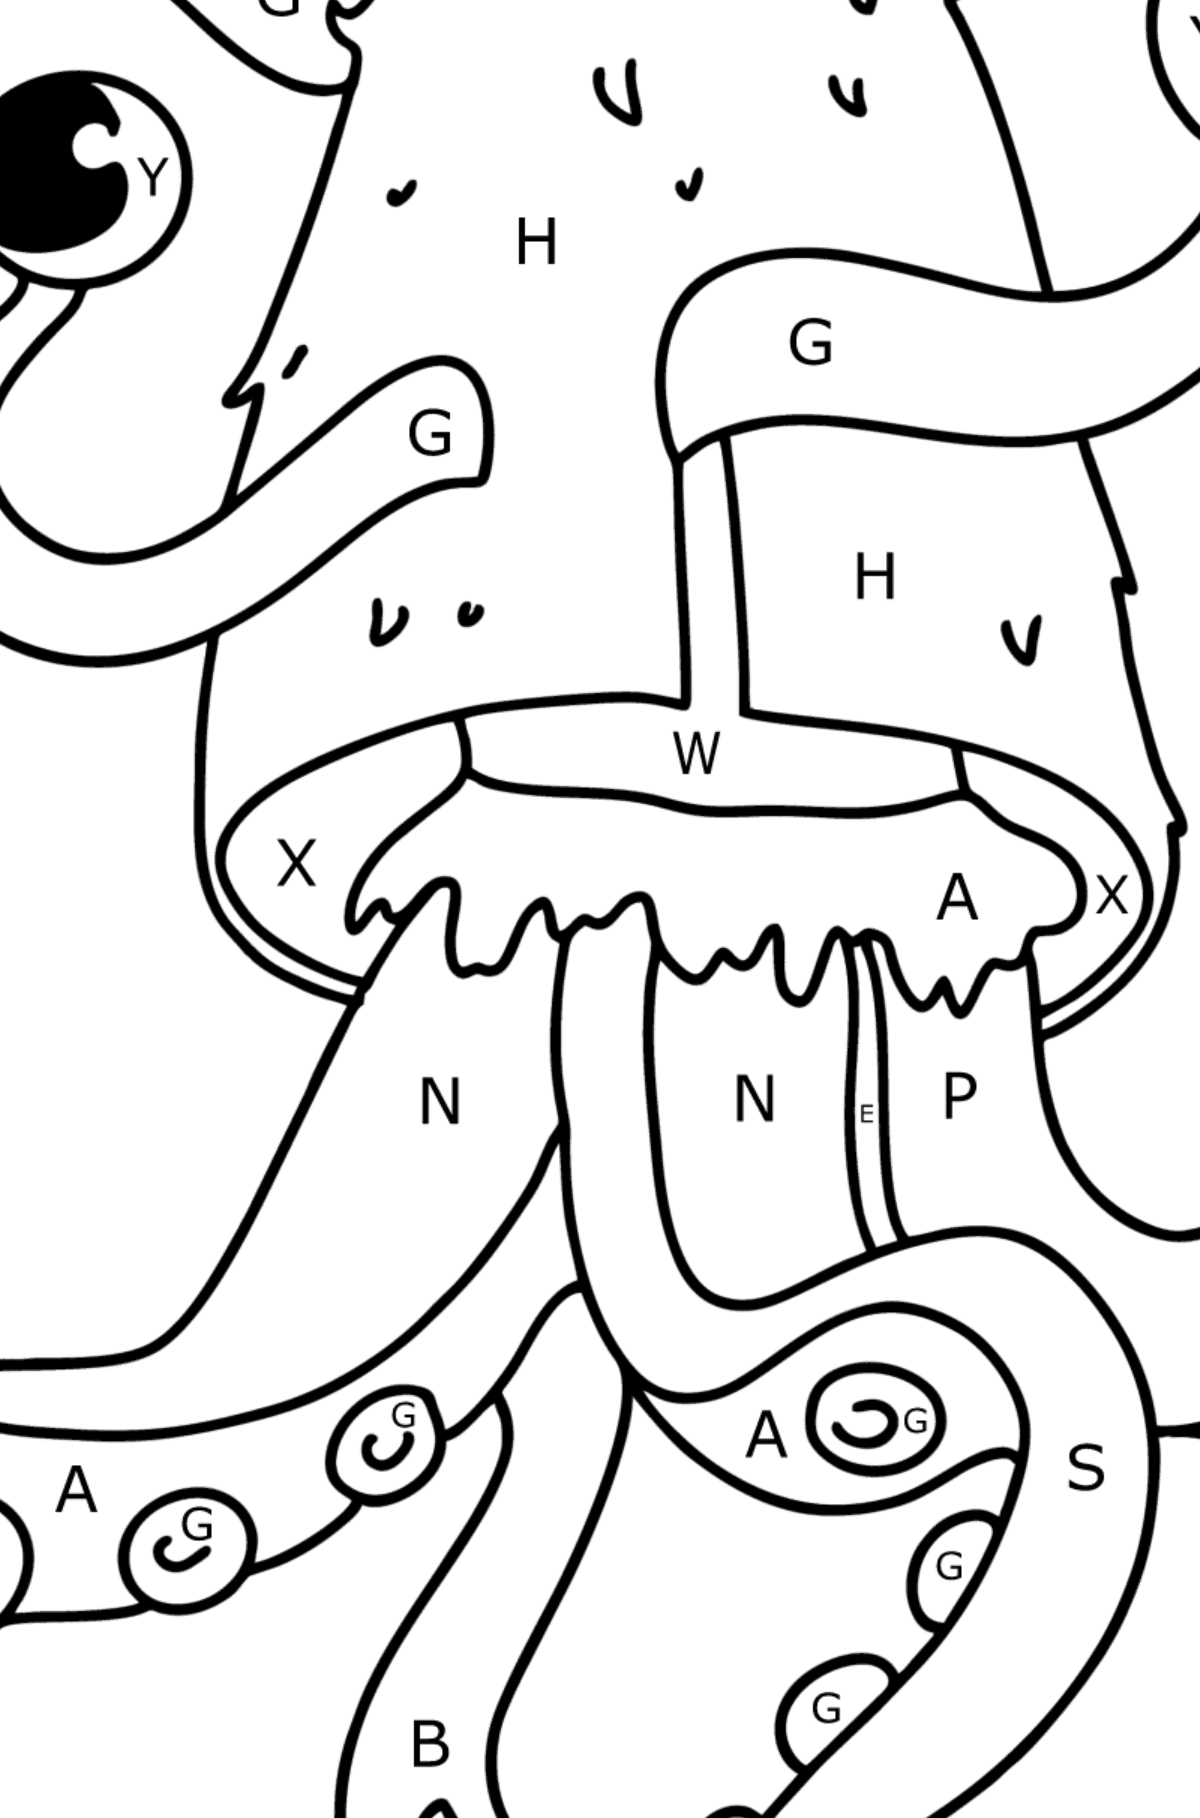 Monster Alien coloring page - Coloring by Letters for Kids